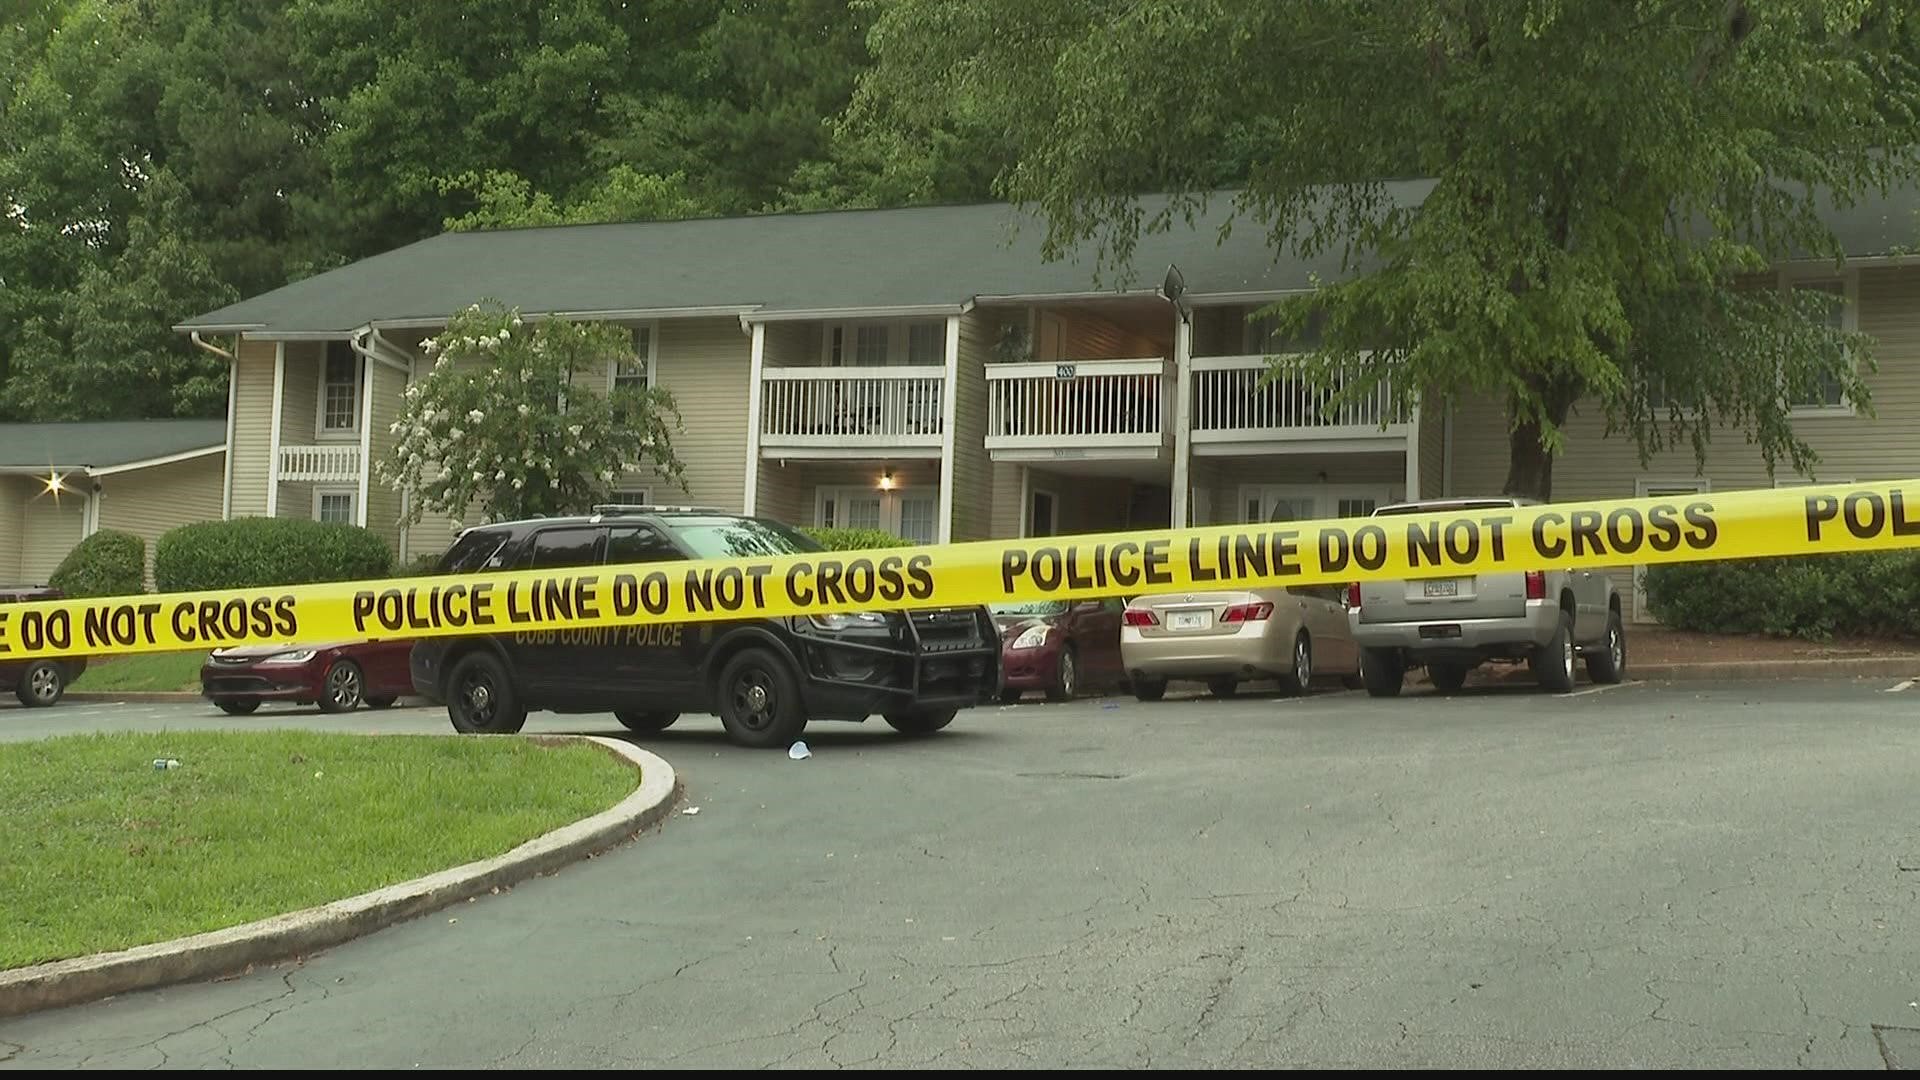 The Austell community is still reeling after a Monday triple shooting at the Premier Apartments killed two people and left one hospitalized.